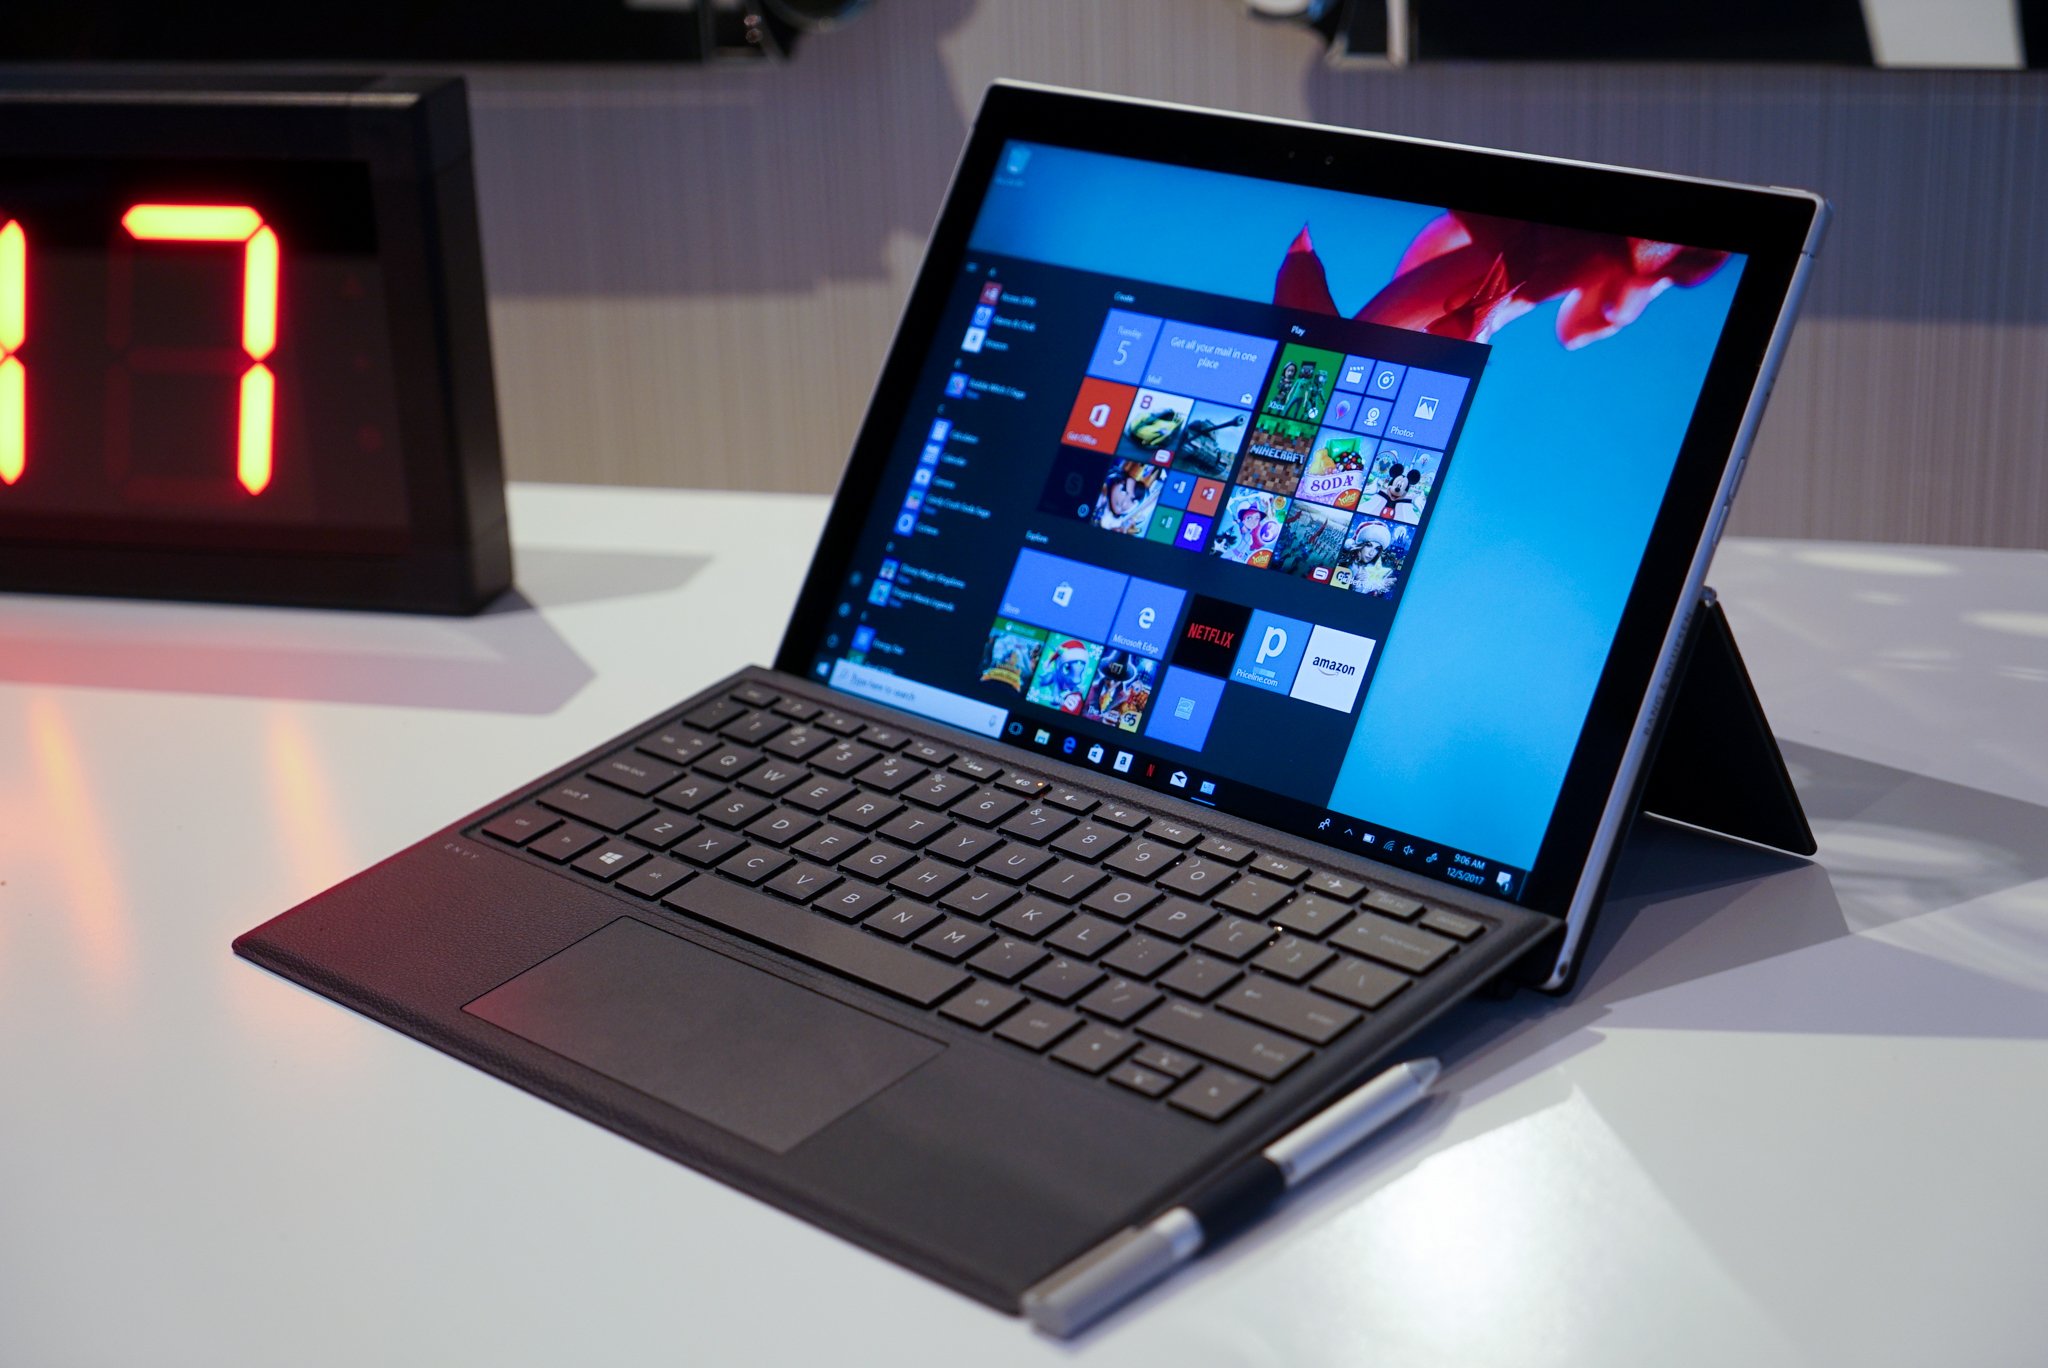 HP Envy x2 with ARM shipping date pushed back to March 23